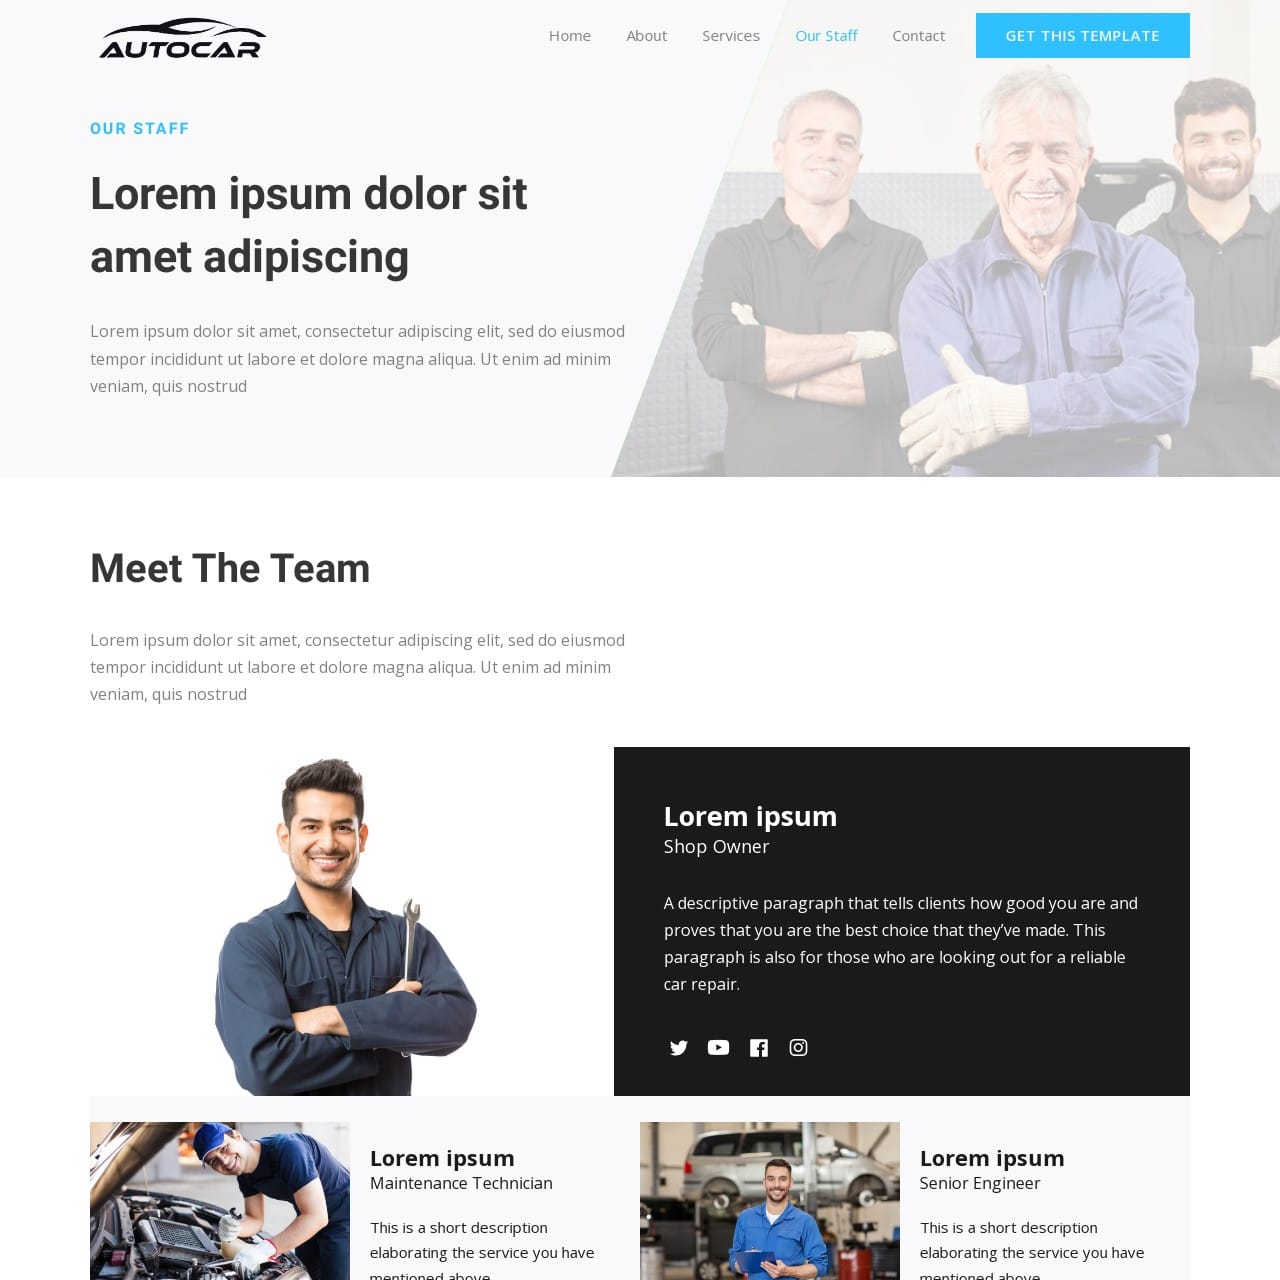 Automotive Template - Our Staff Page